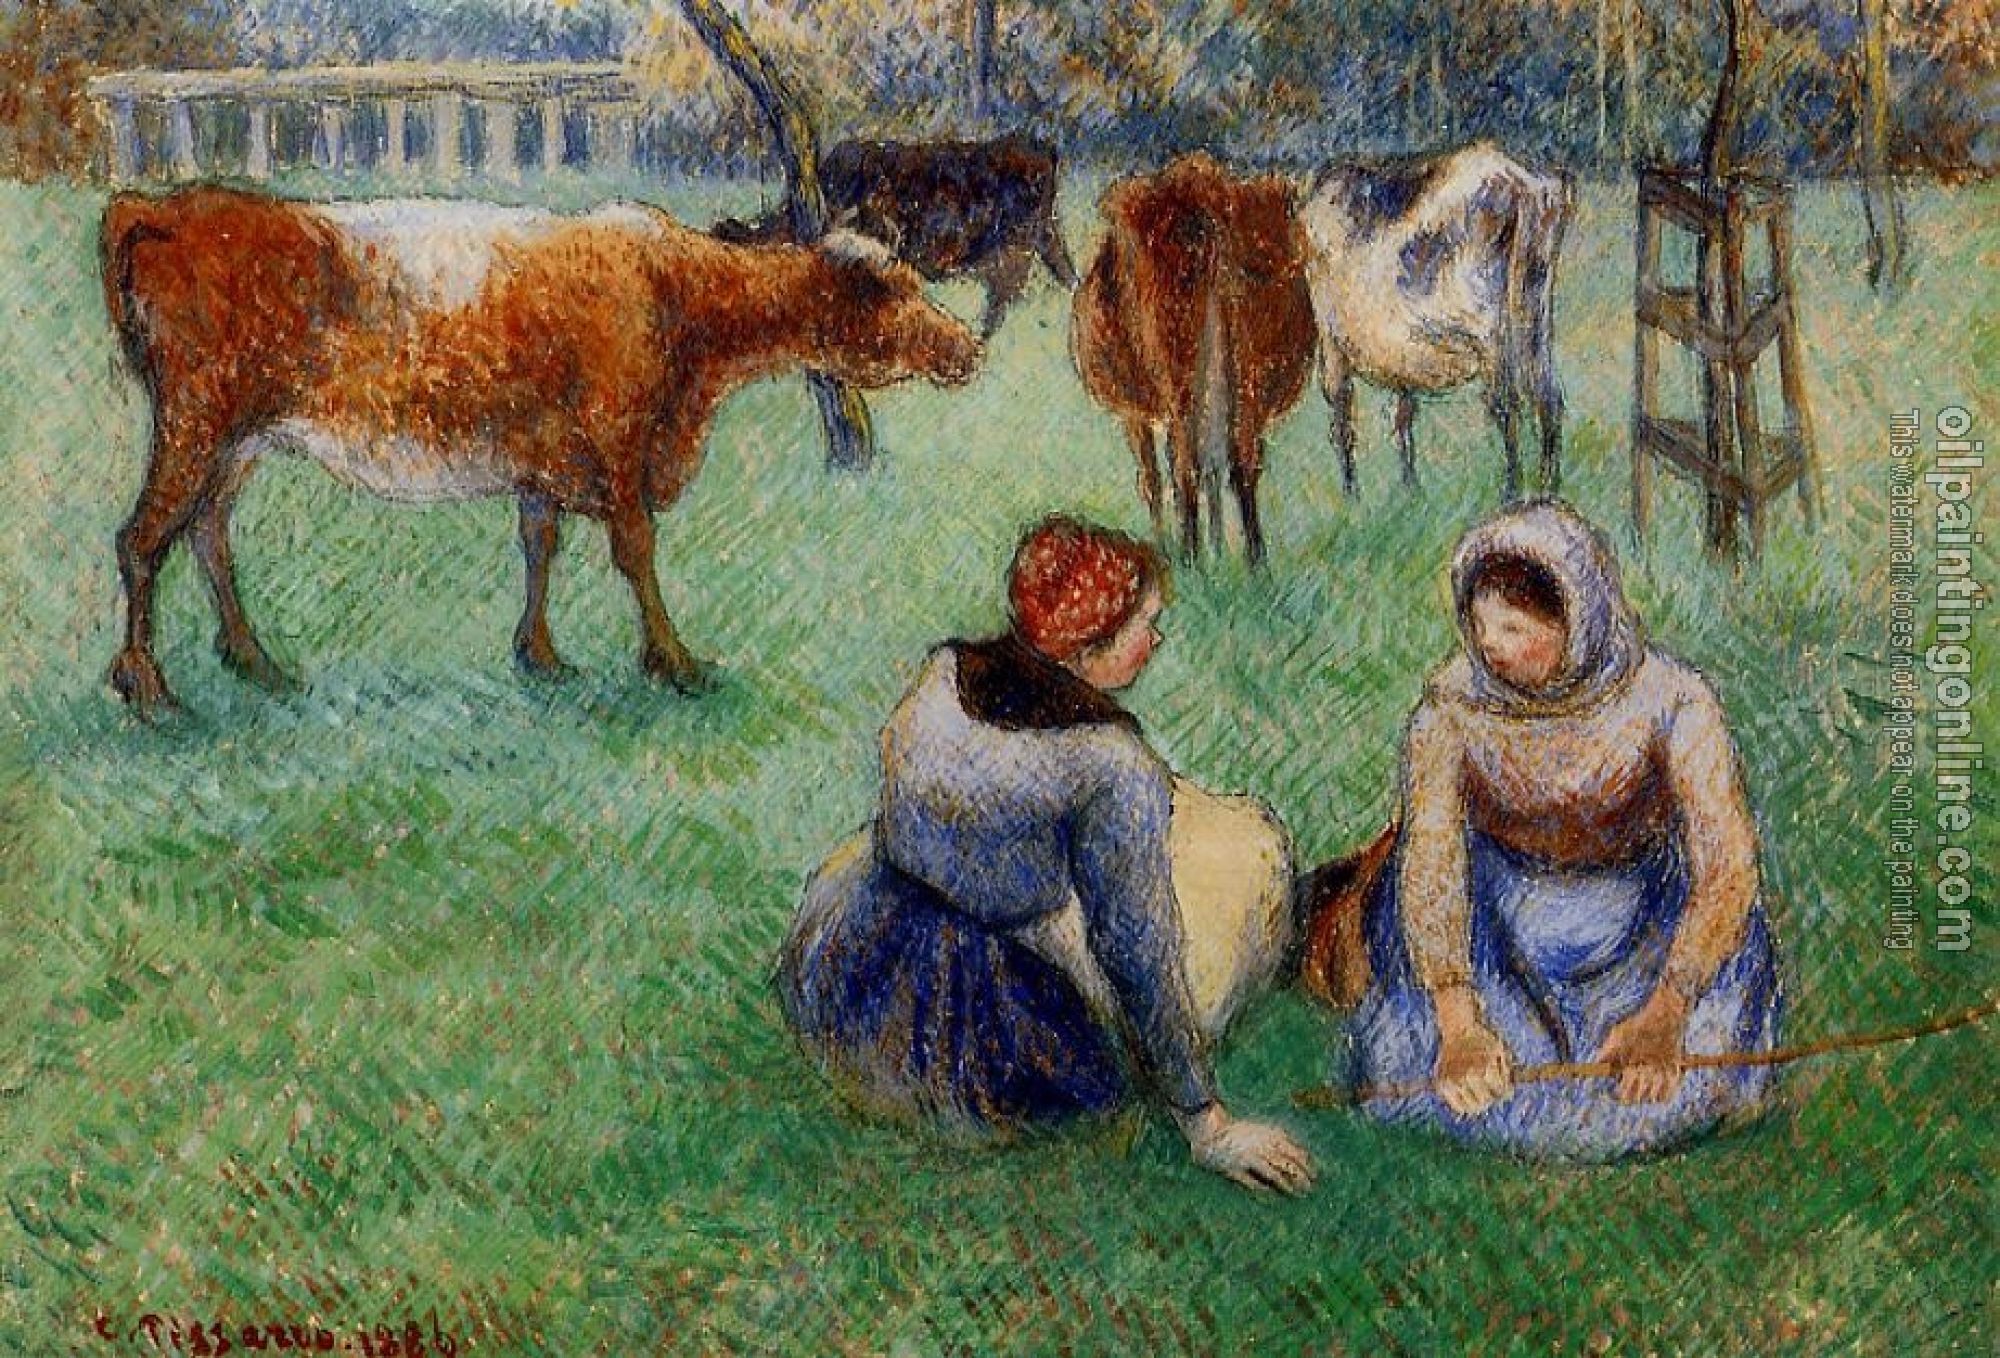 Pissarro, Camille - Seated Peasants Watching Cows